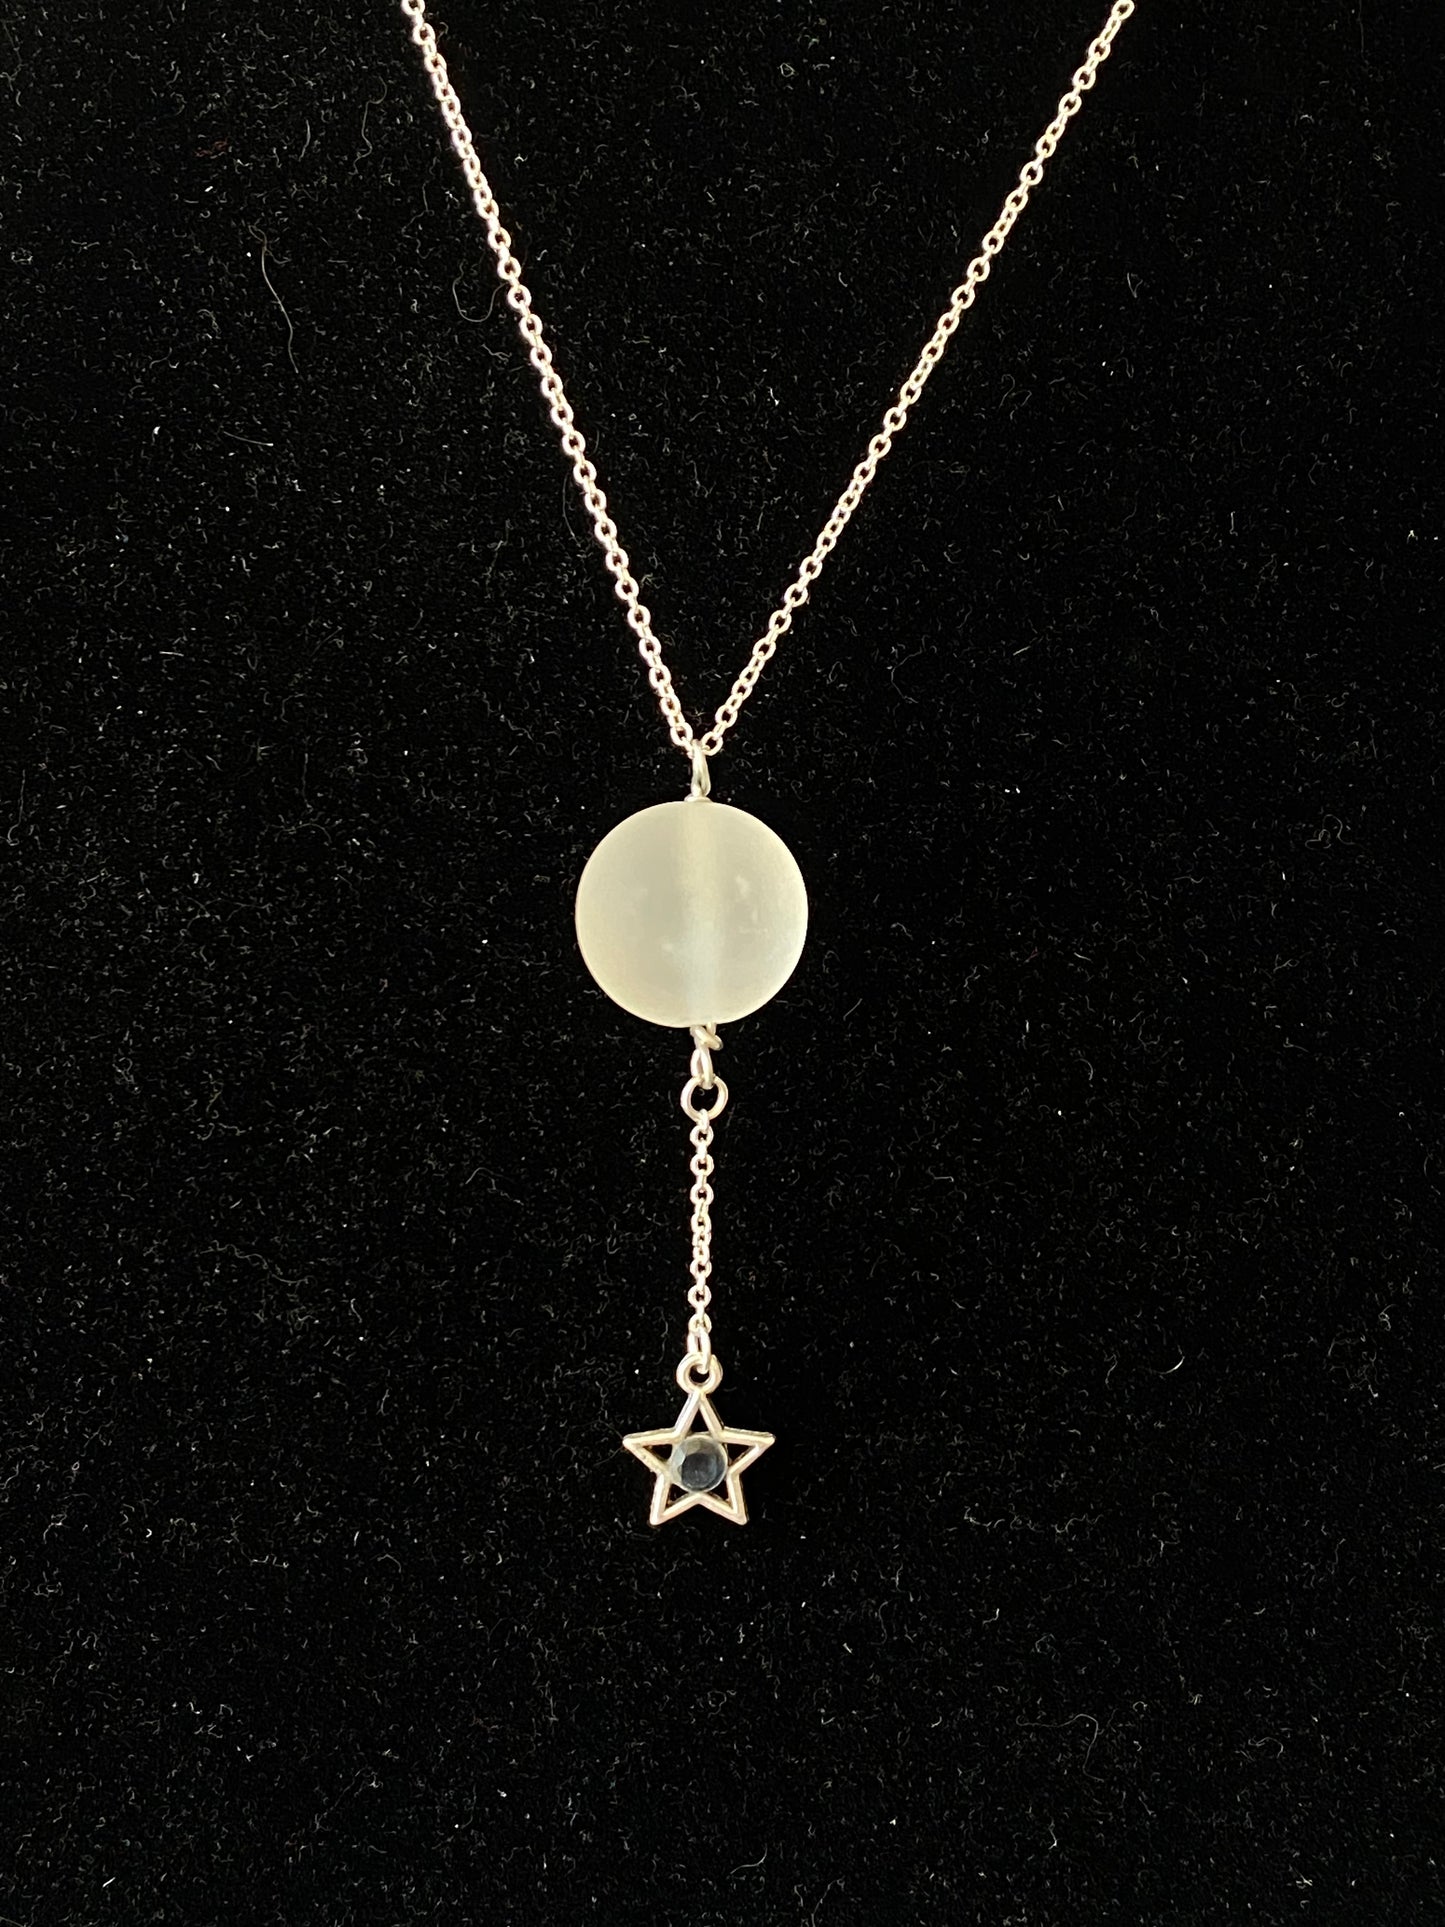 Necklace moon